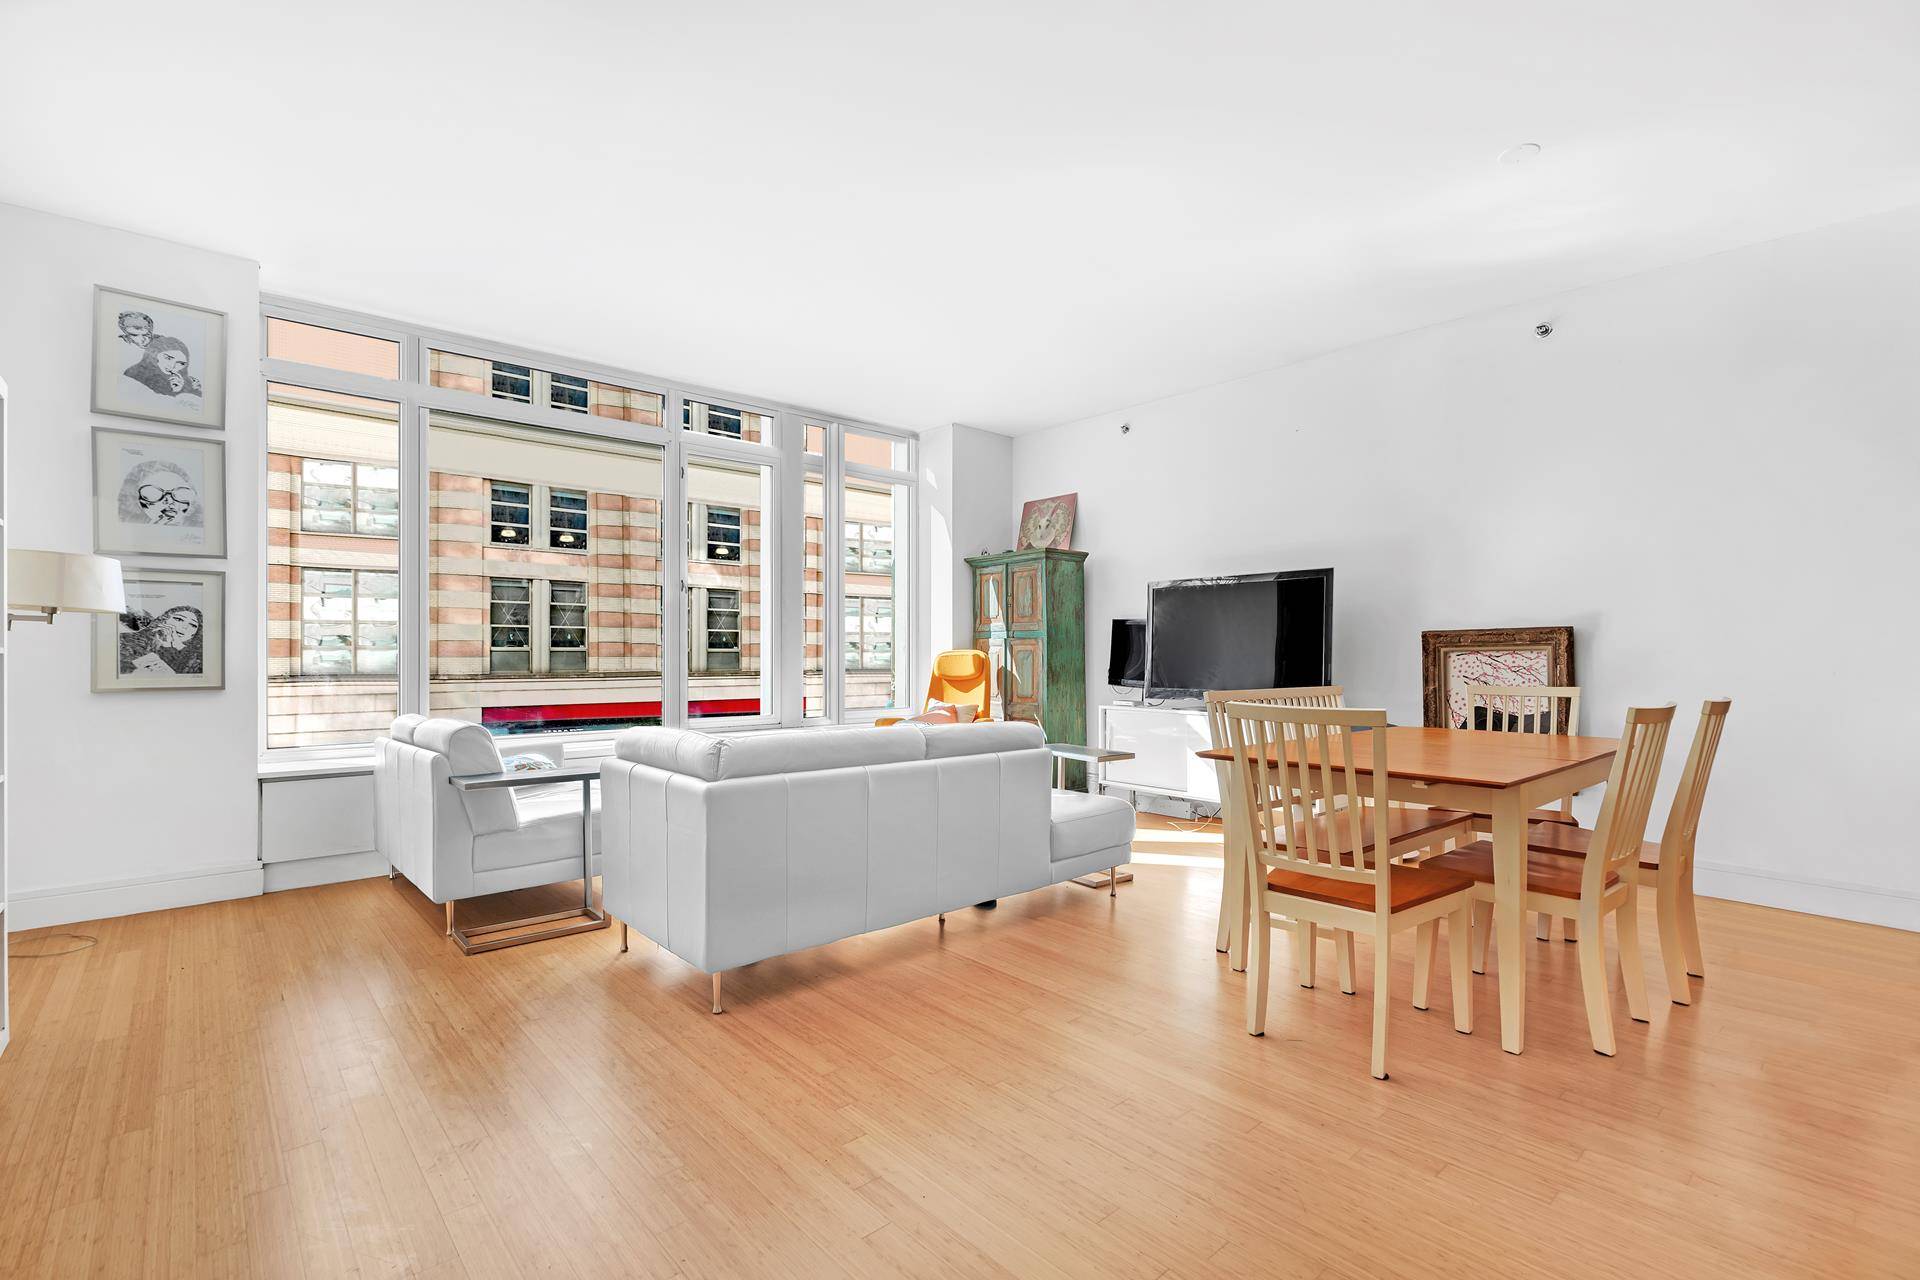 Move right into this wonderful 2 bedroom, 2 bath condominium is a modern masterpiece set in the Upper West Side's most vibrant neighborhood.